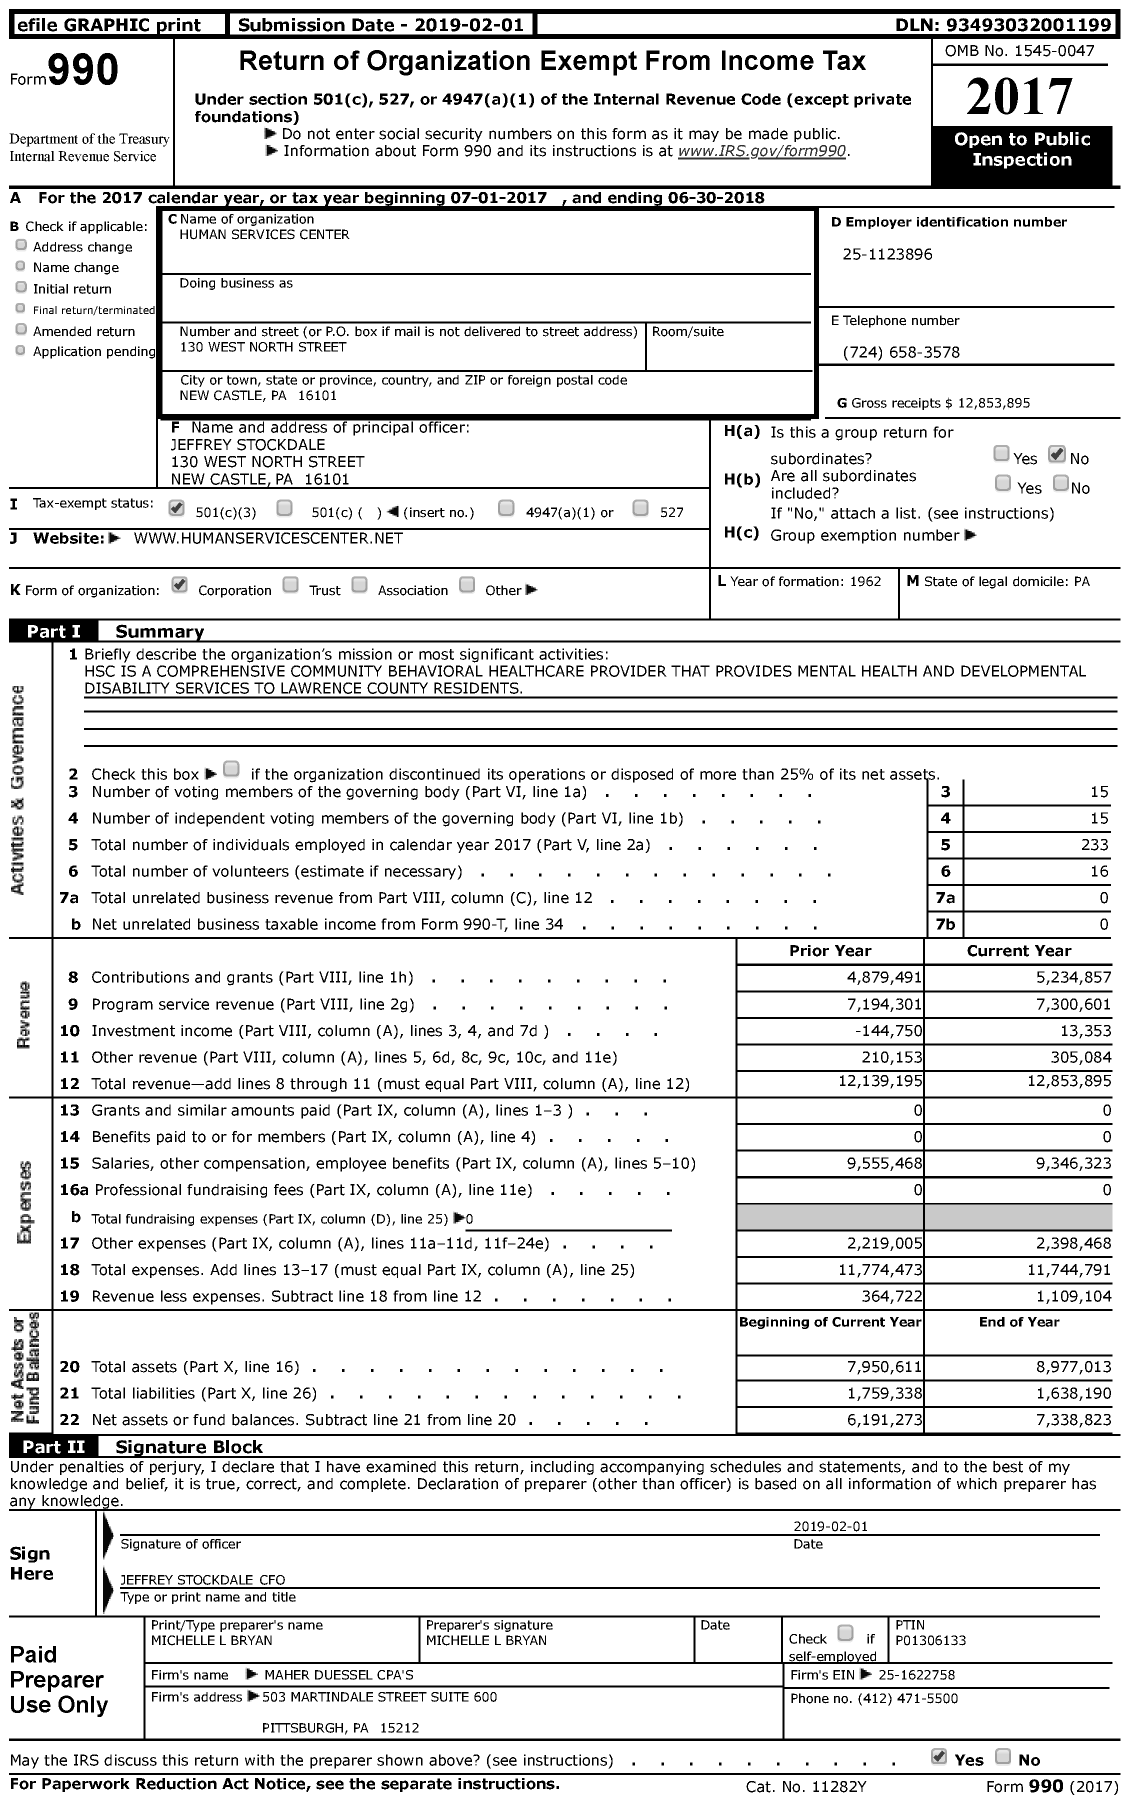 Image of first page of 2017 Form 990 for Human Services Center (HSC)